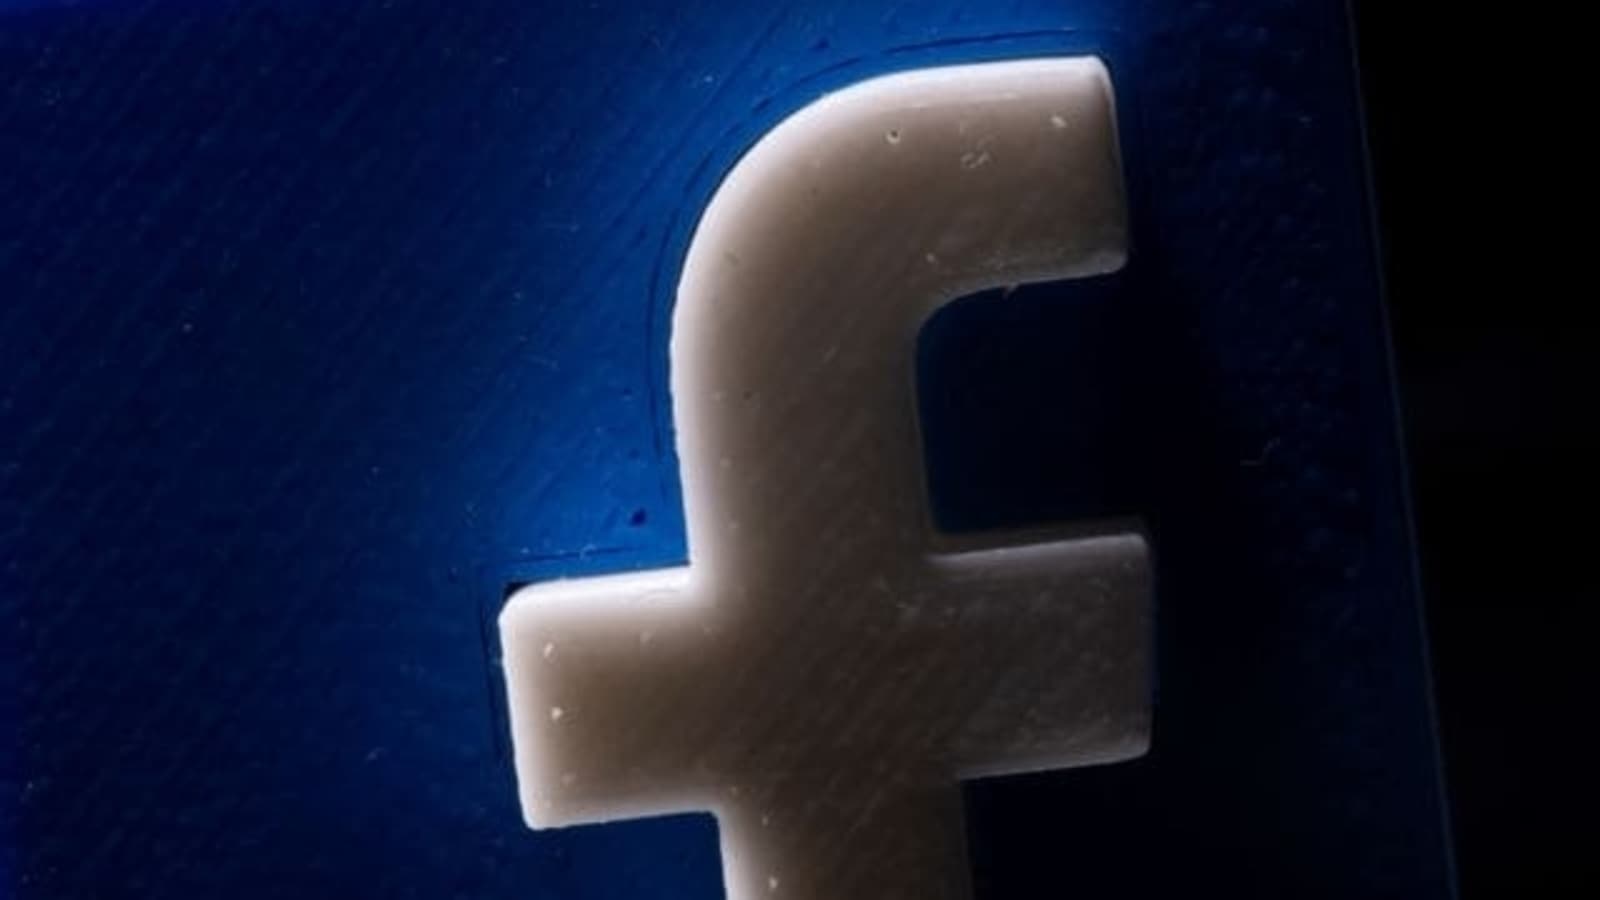 Facebook Scrambles To Take Down Profile Frames With Anti Vaccine Claims Ht Tech